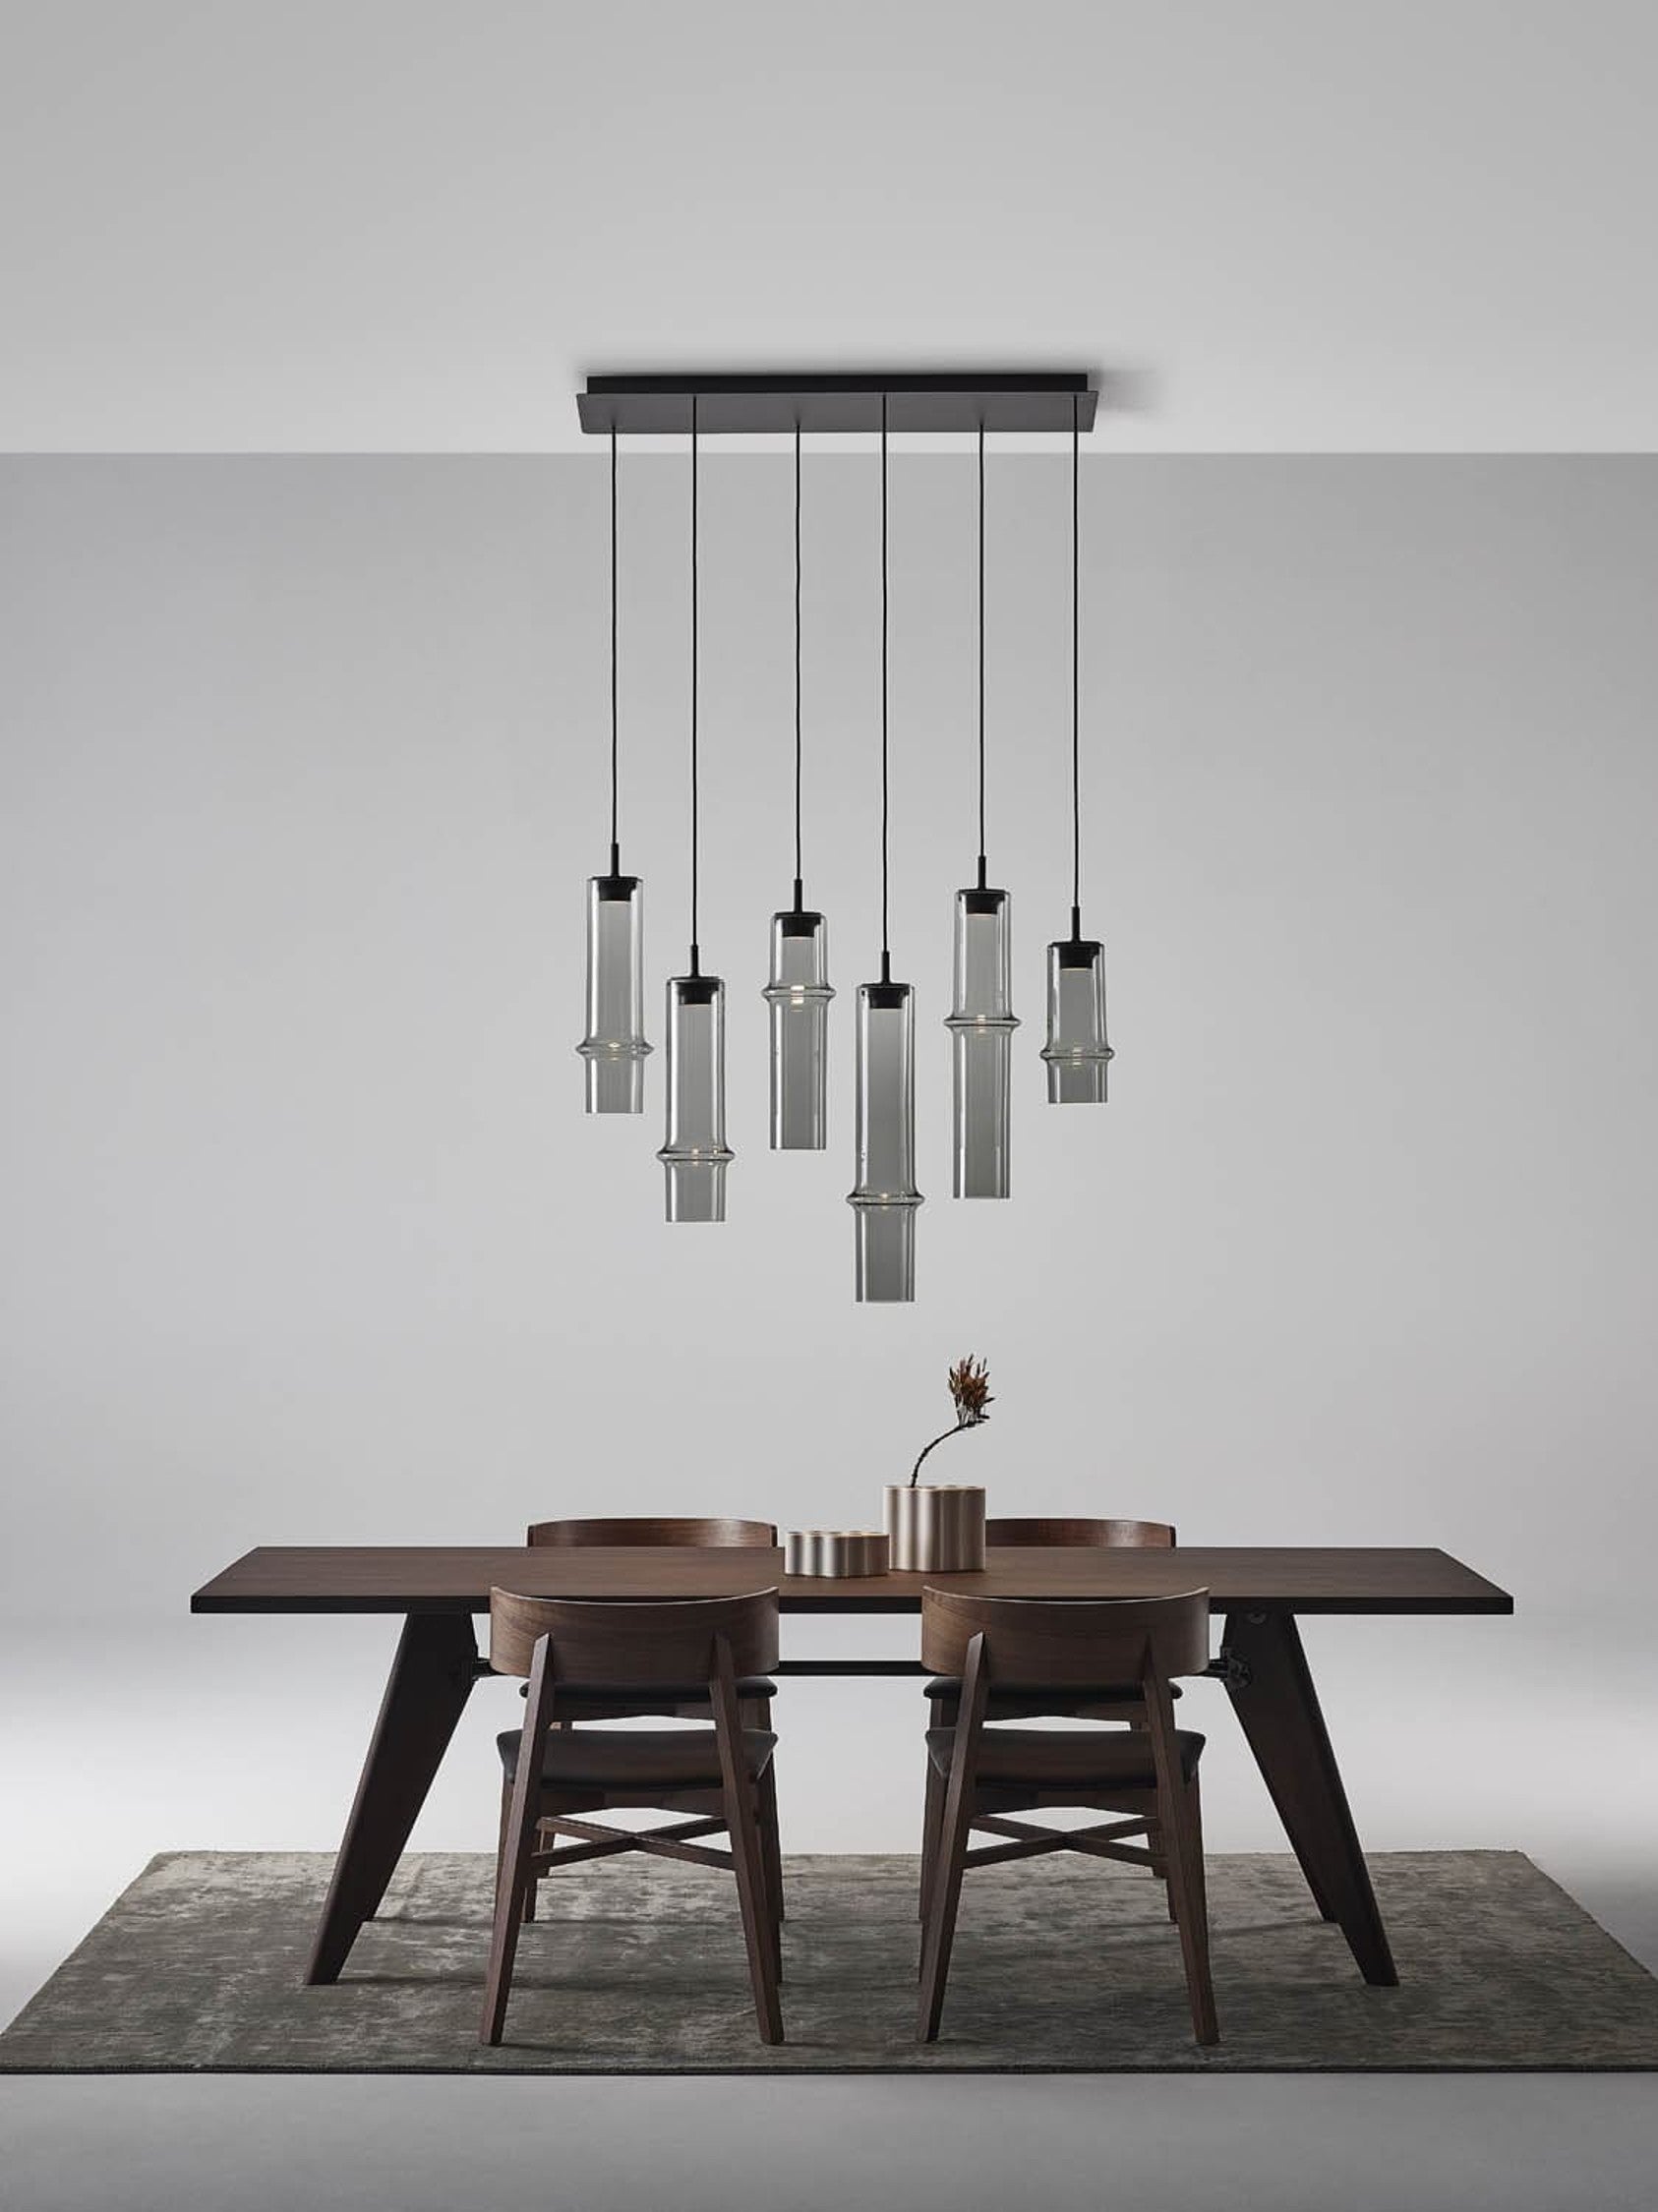 BAMBOO FOREST L UP - Pendant Light